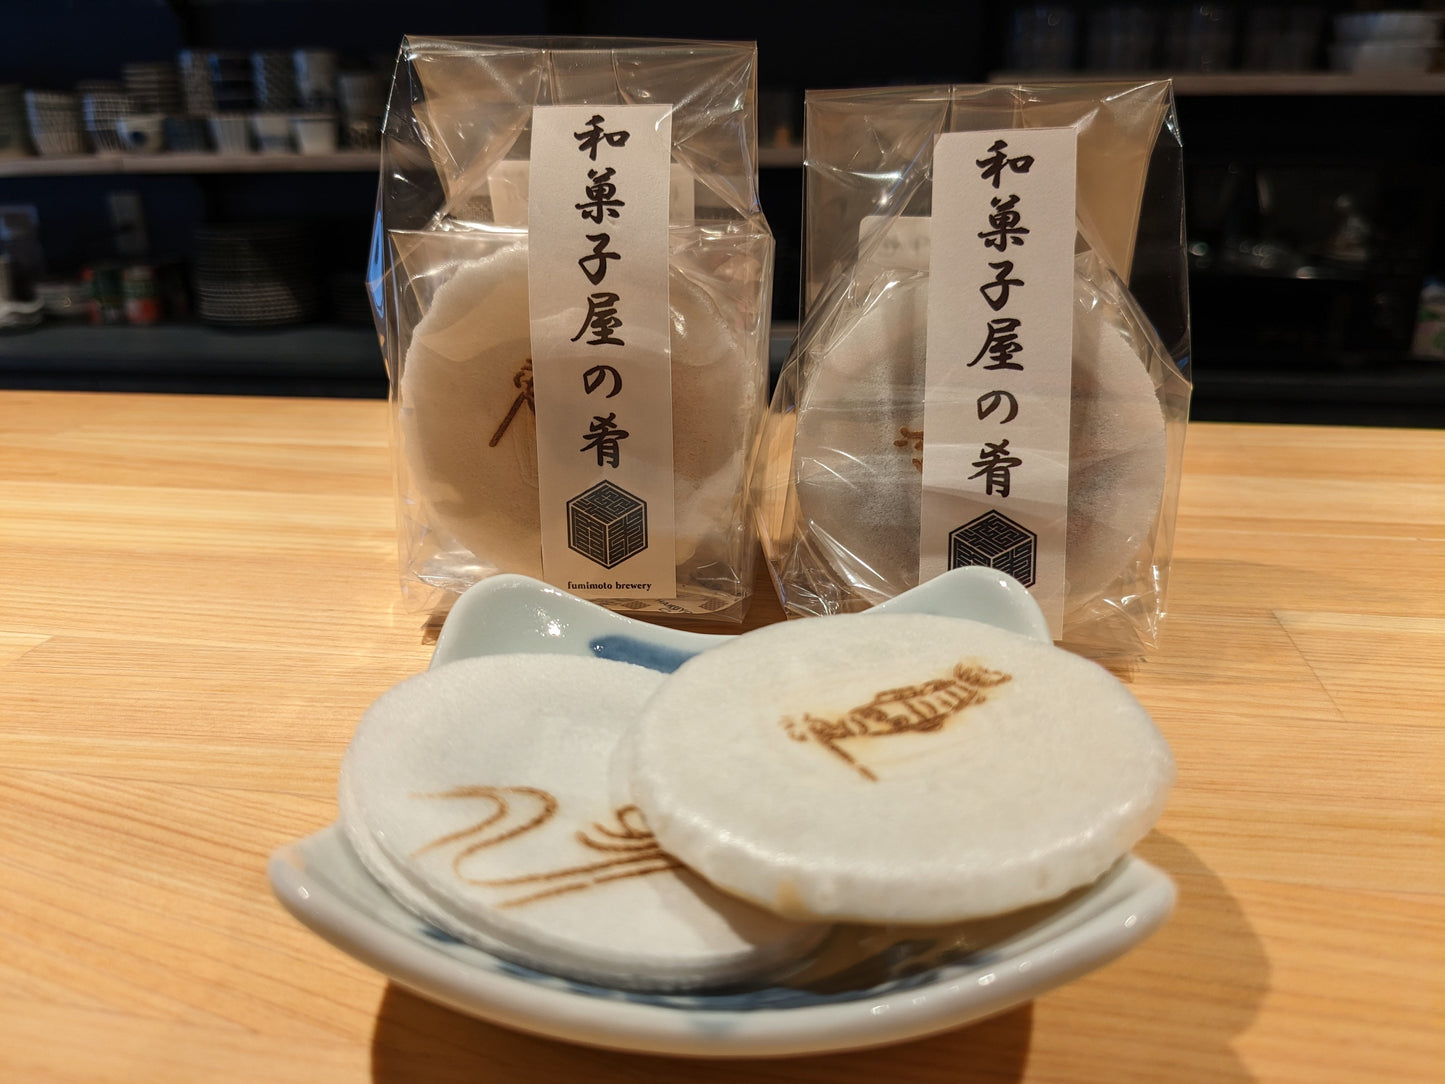 Appetizers at a Japanese confectionery store SHOKAKUDO